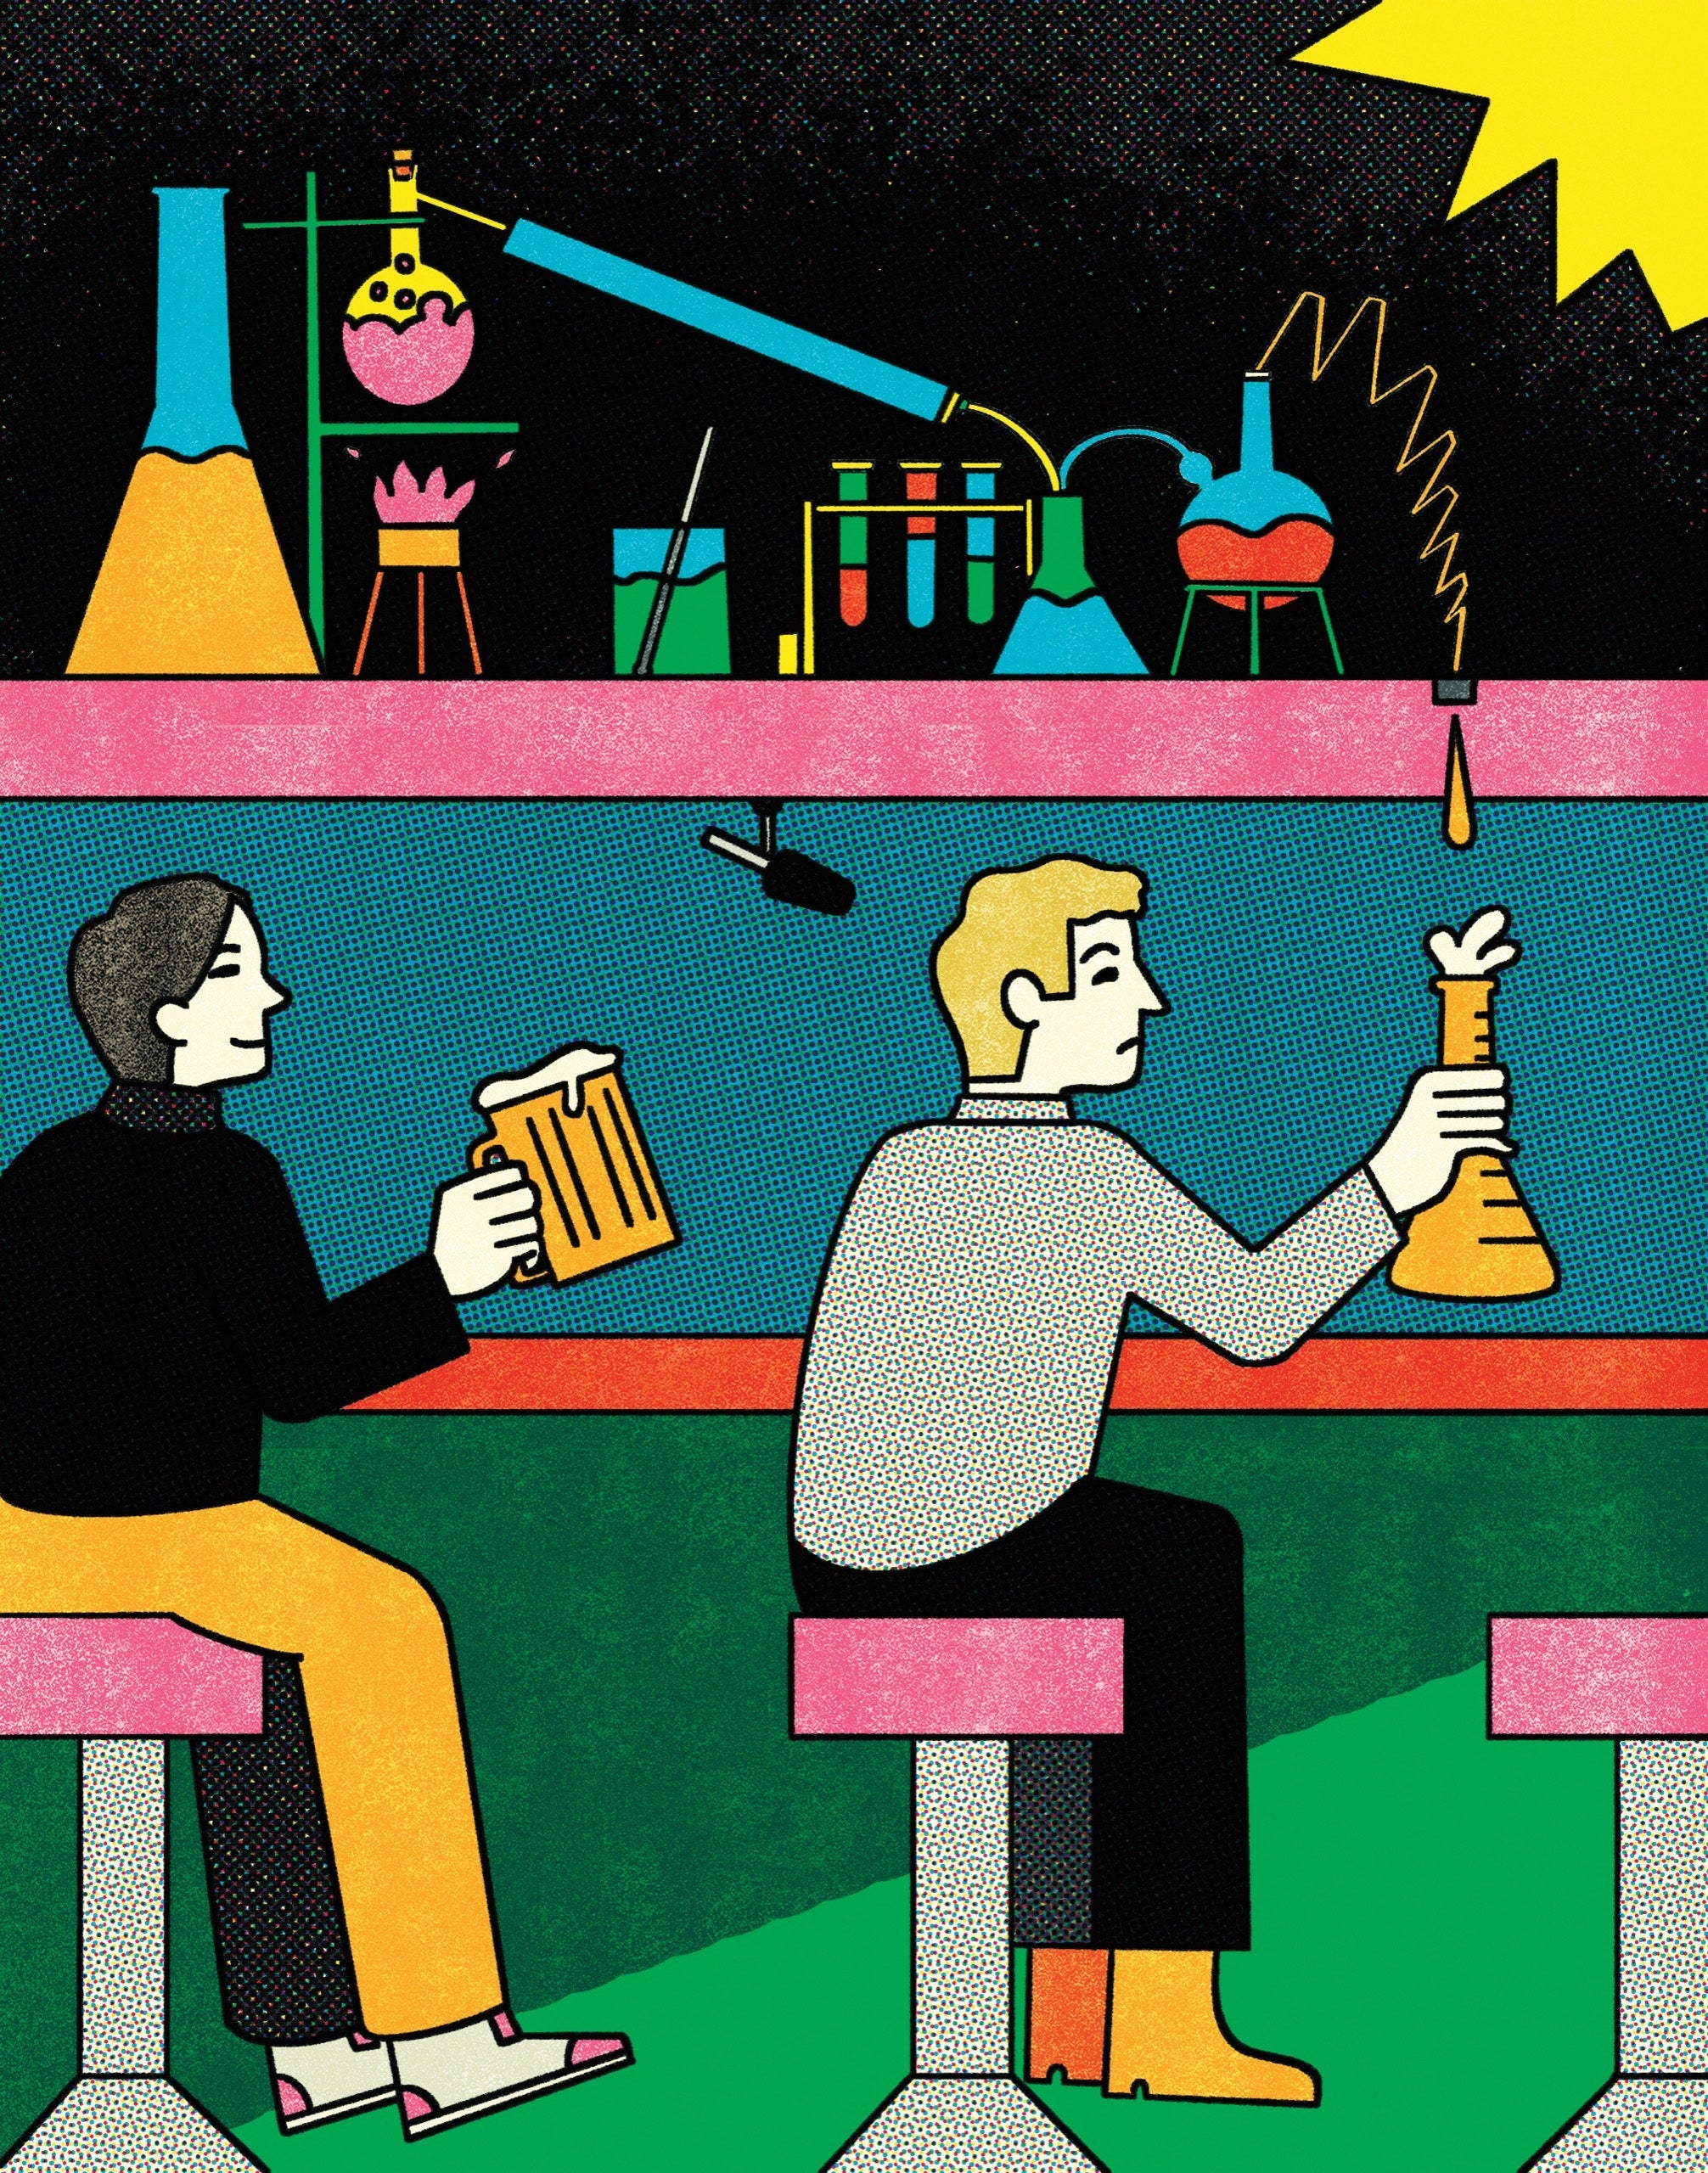 An Ex-Drinker’s Search for a Sober Buzz